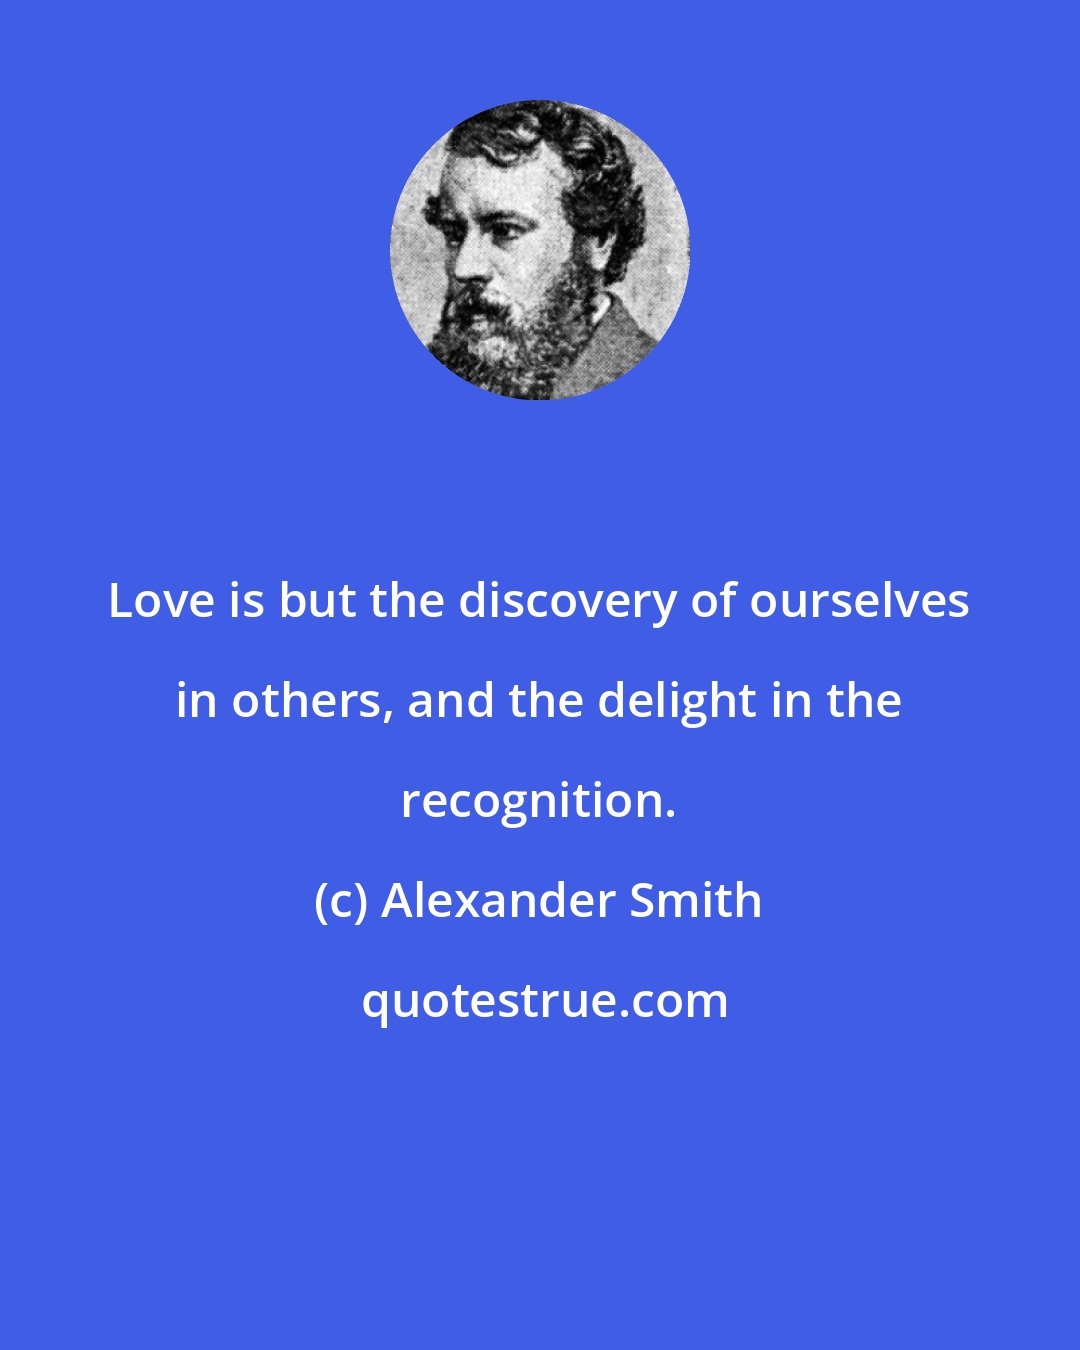 Alexander Smith: Love is but the discovery of ourselves in others, and the delight in the recognition.